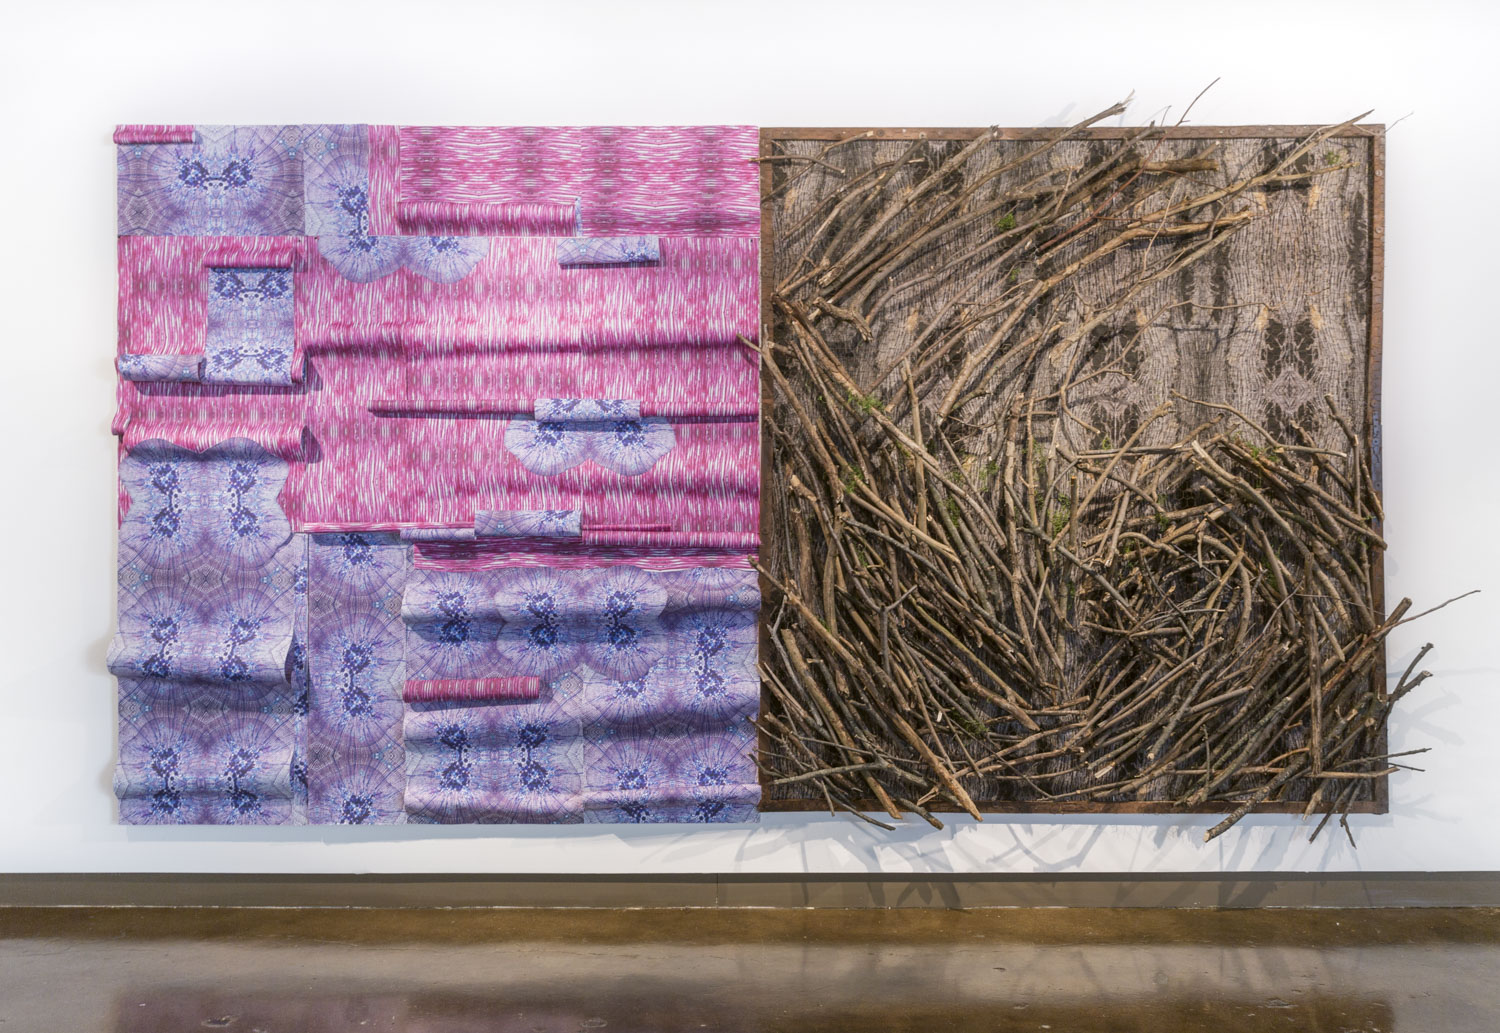 On the left is a purple and pink piece that looks like wall paper peeling off and layered, on the right is a piece that is made of a collection of tree branches on a brown textured background, both pieces are hung up on the wall right next to each other